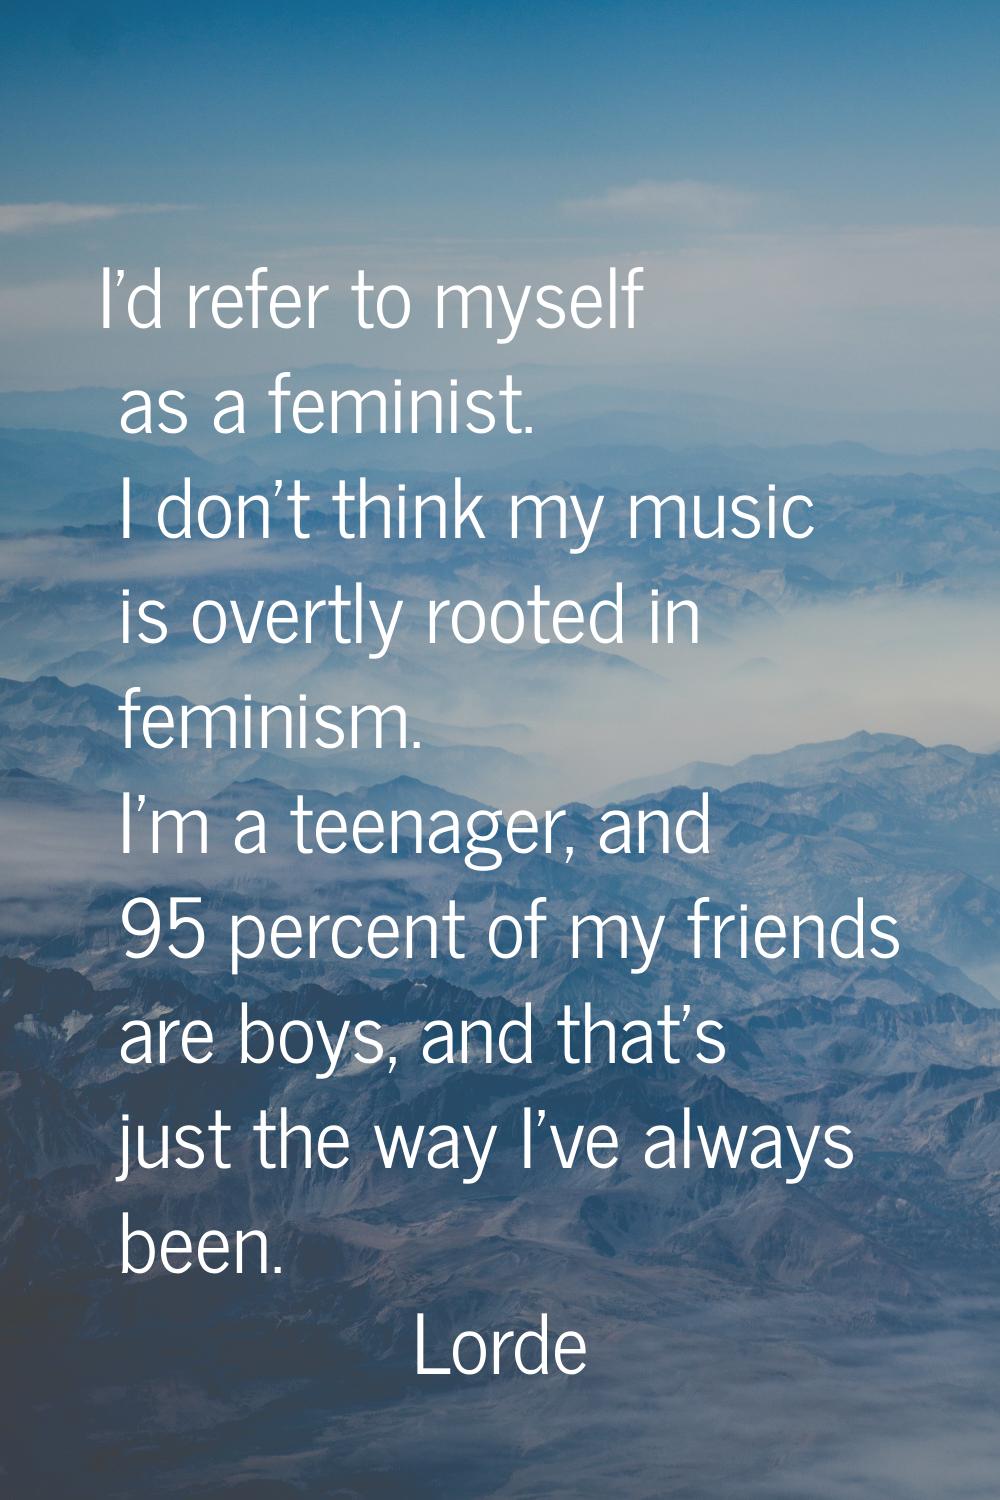 I'd refer to myself as a feminist. I don't think my music is overtly rooted in feminism. I'm a teen